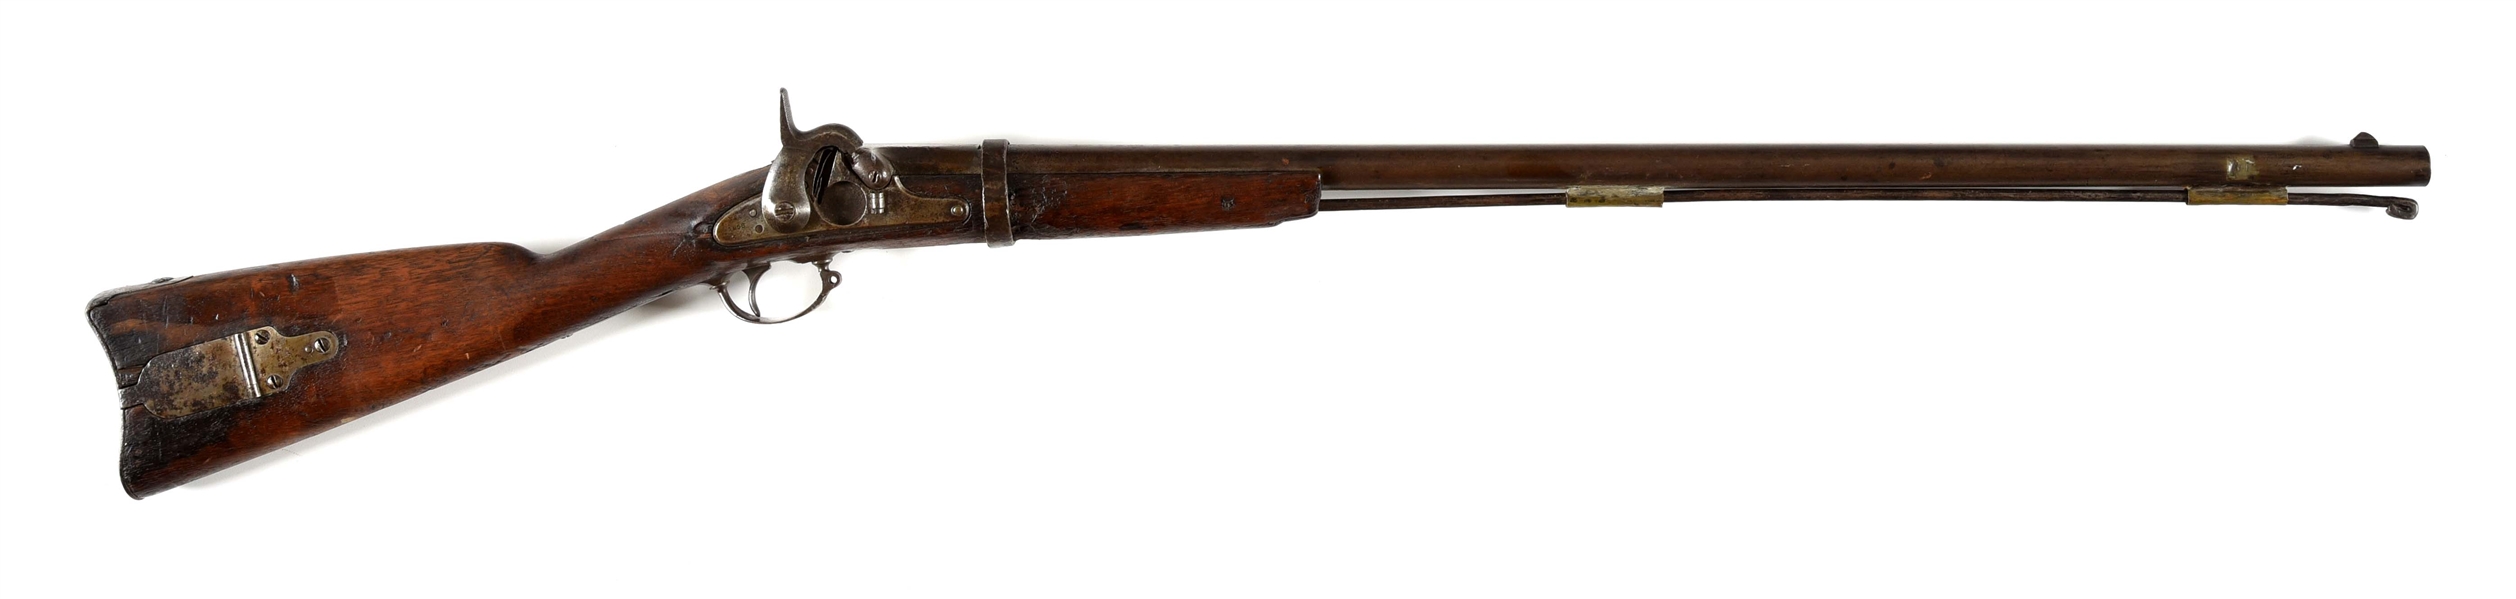 (A) HARPERS FERRY MODEL 1855 PERCUSSION MUSKET.